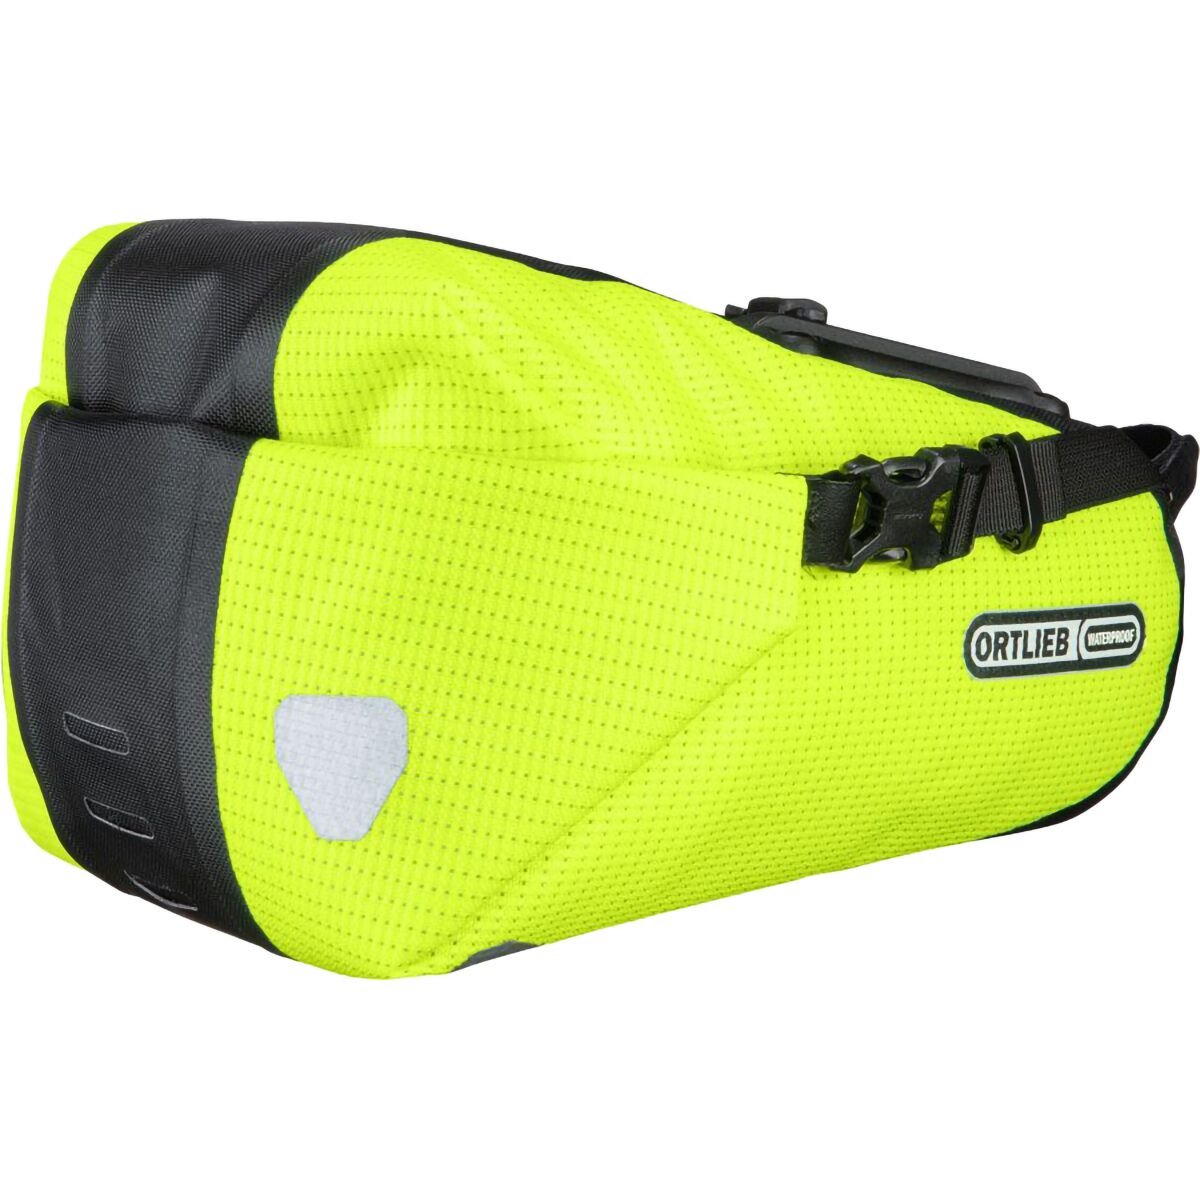 Ortlieb Saddle Bag Two High-Visibility